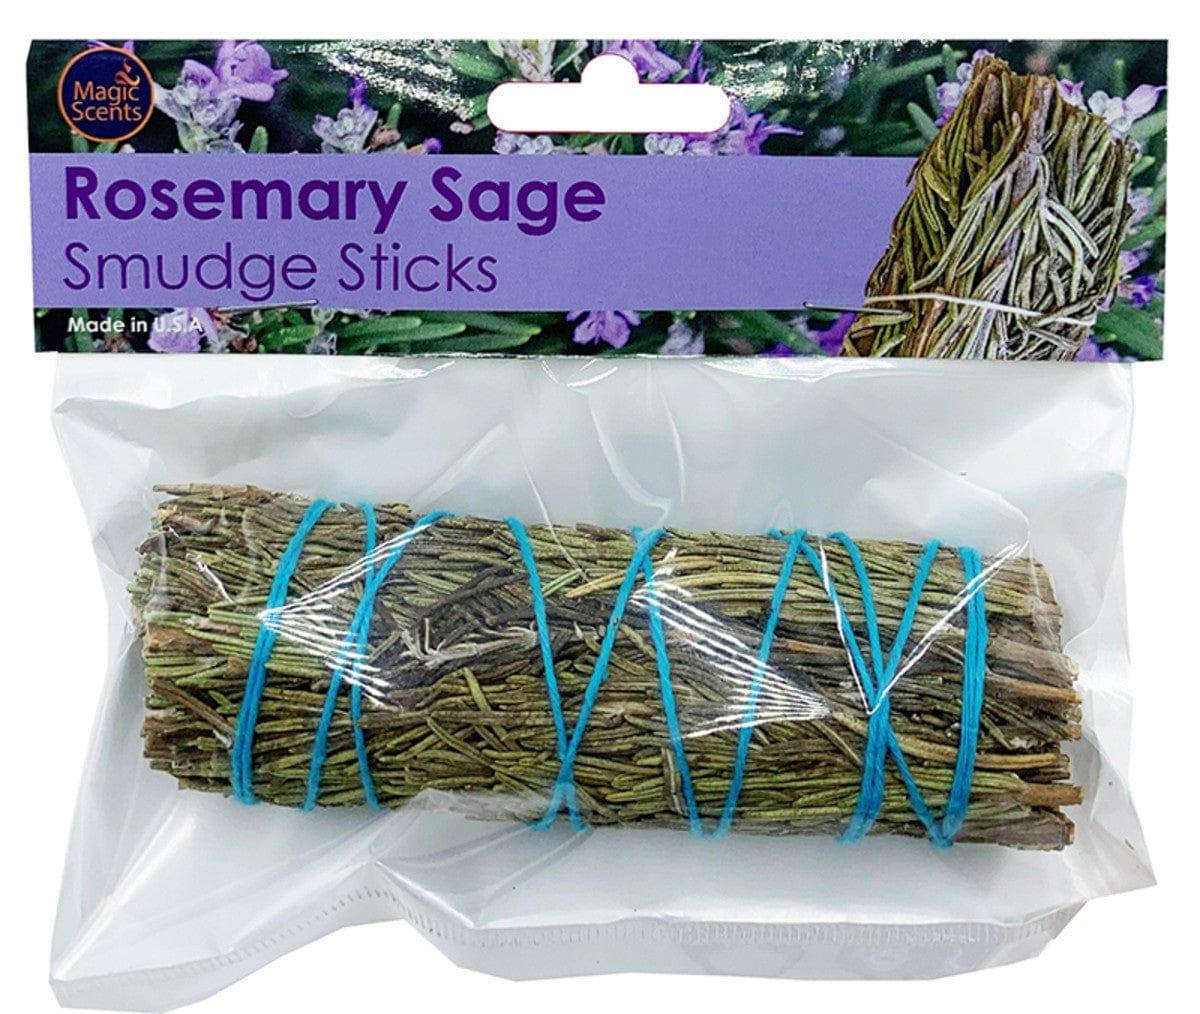 Rosemary Sage Smudge Stick 4 inch - Inspire Me Naturally 